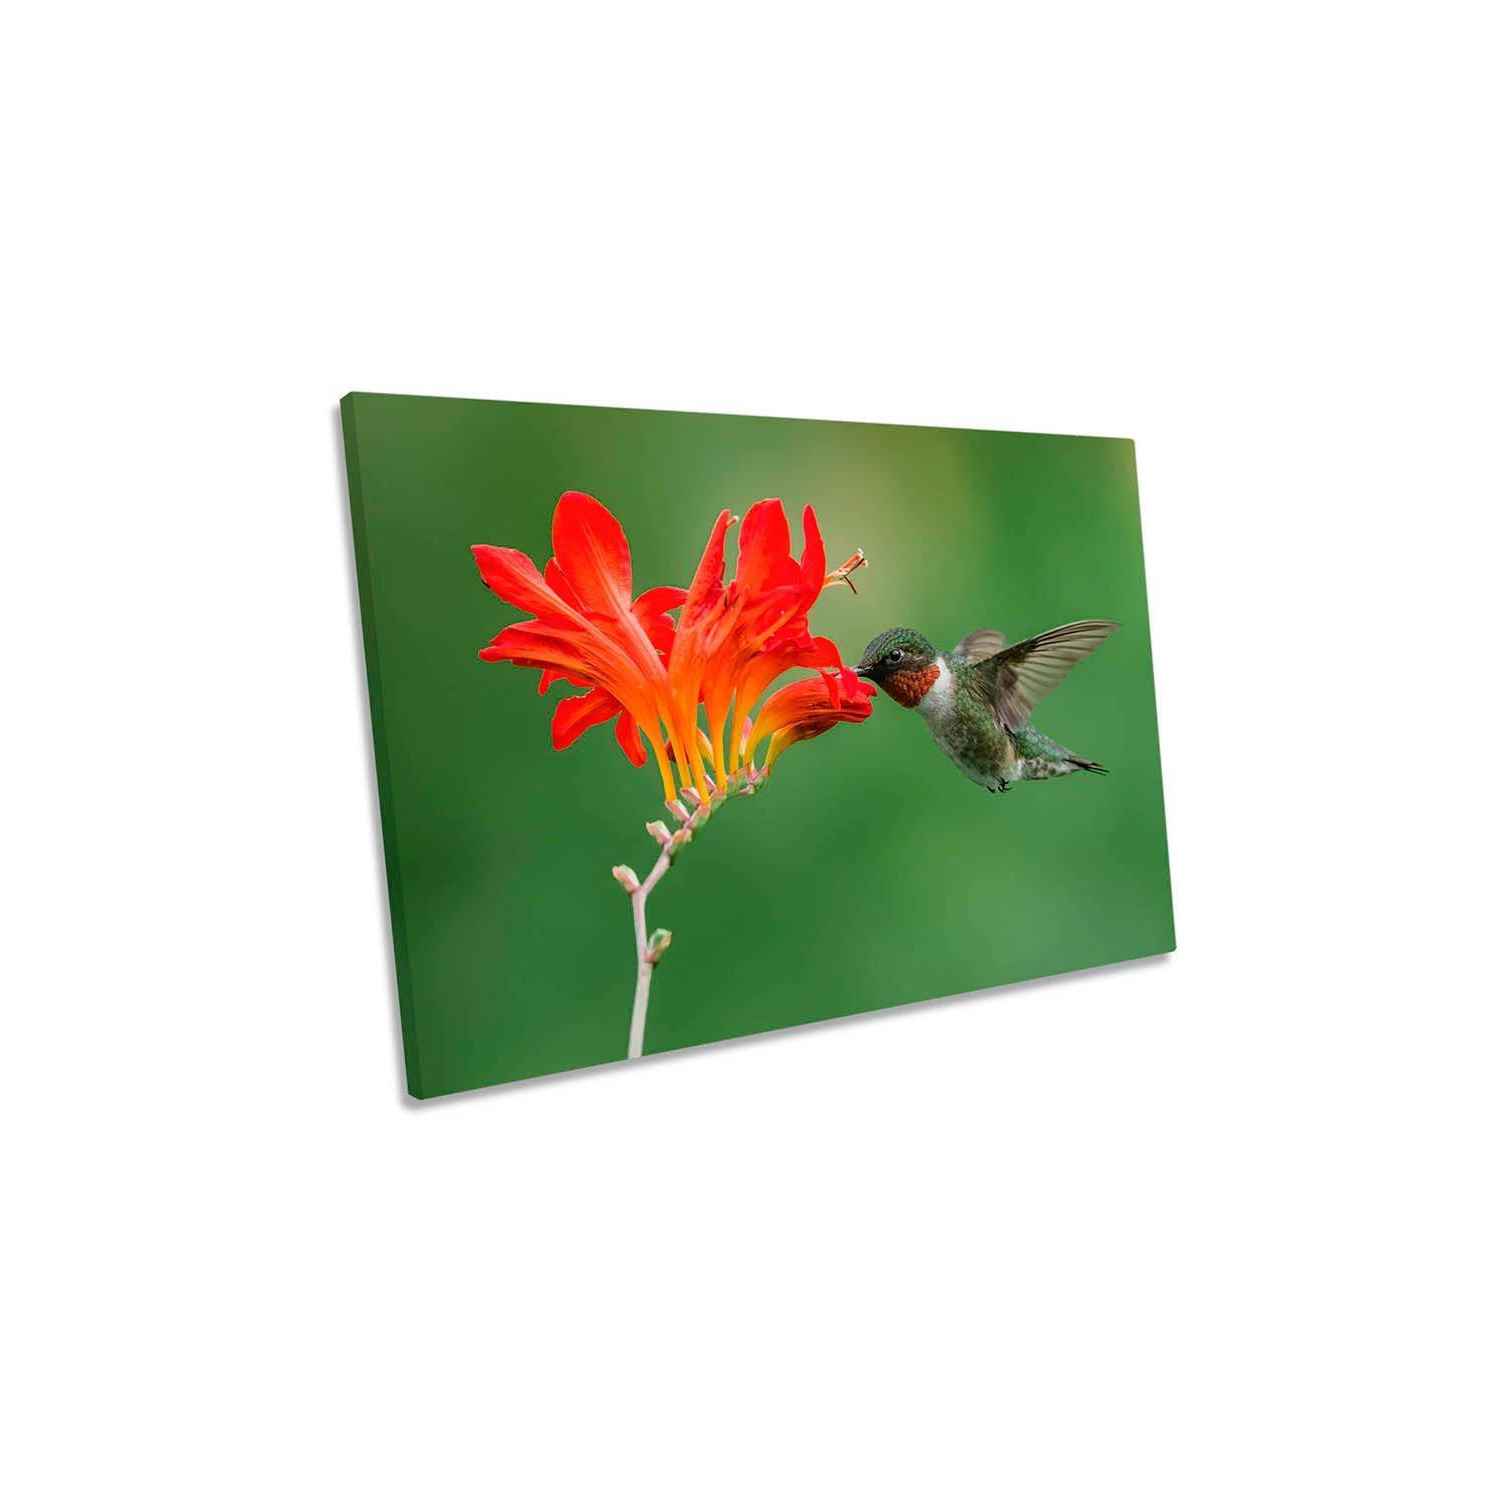 Ruby Throated Hummingbird Flower Canvas Wall Art Picture Print - image 1